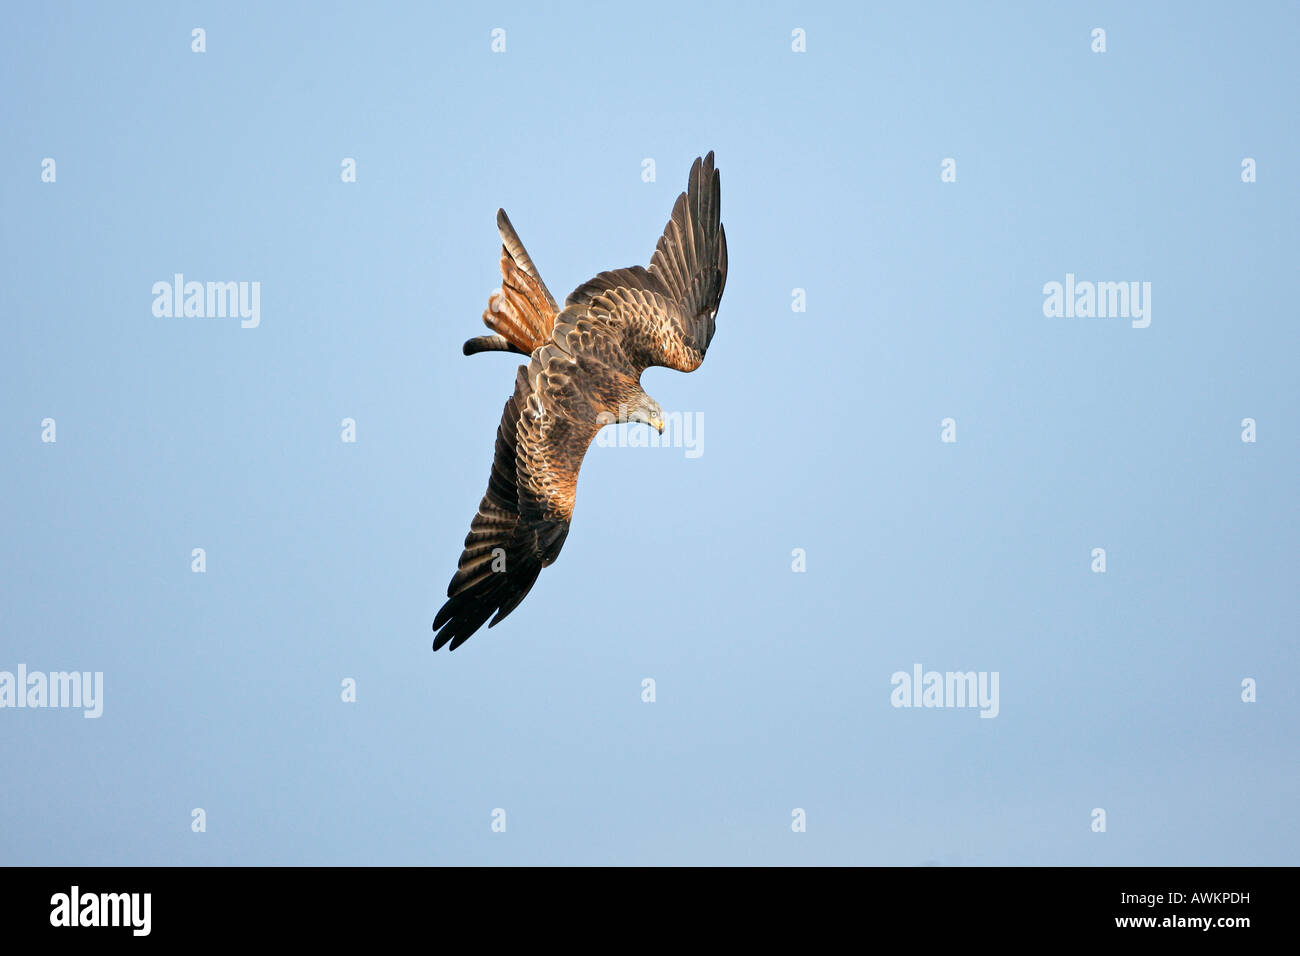 RED KITE Milvus milvus diving to pick up food from the ground Wales October RedKite0689 Stock Photo